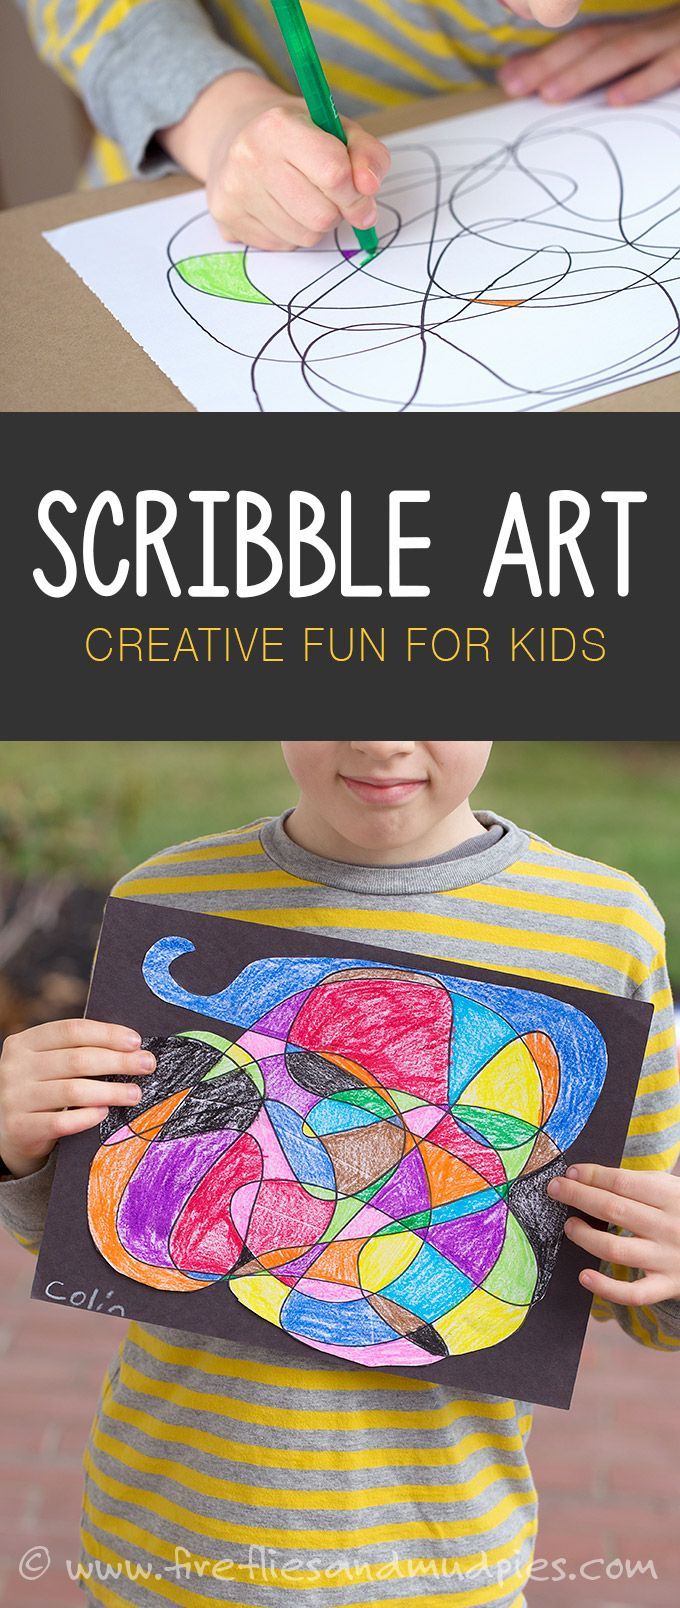 Scribble art is a fun, boredom busting, creative art activity for kids!  Sponsored by #MrSketchScentedCray